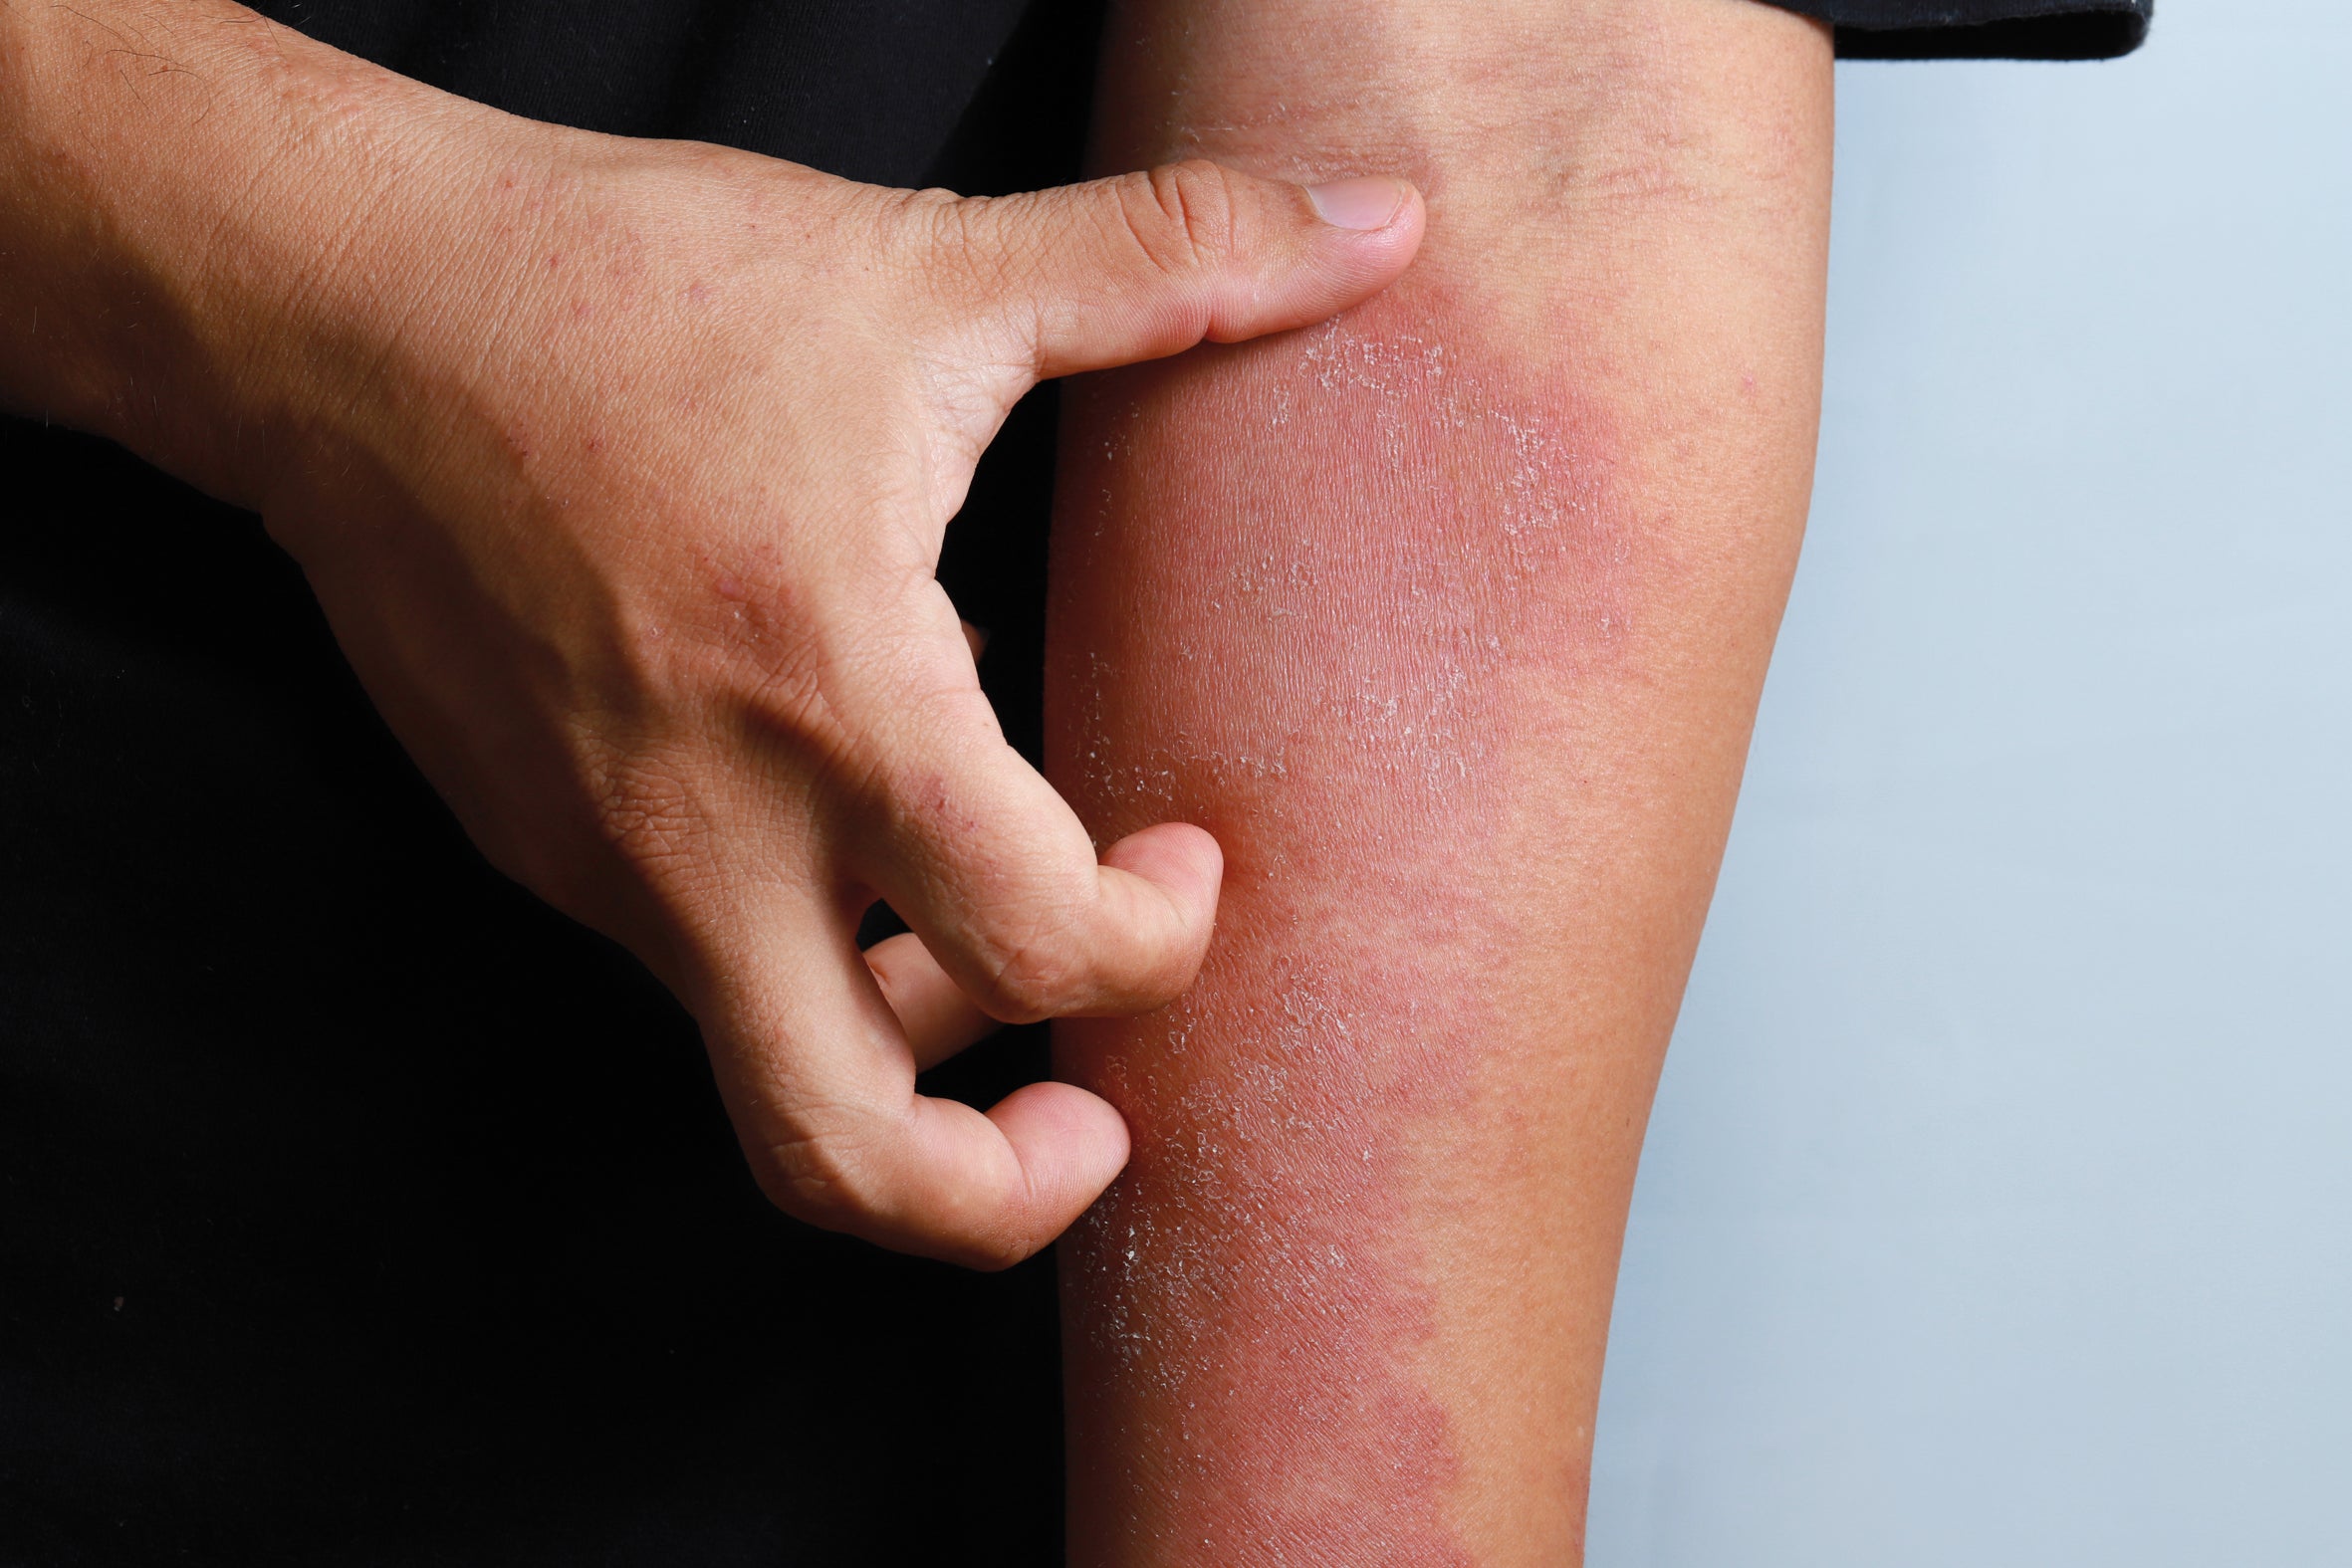 Psoriasis vs. Eczema: The Differences, Symptoms, and Treatments